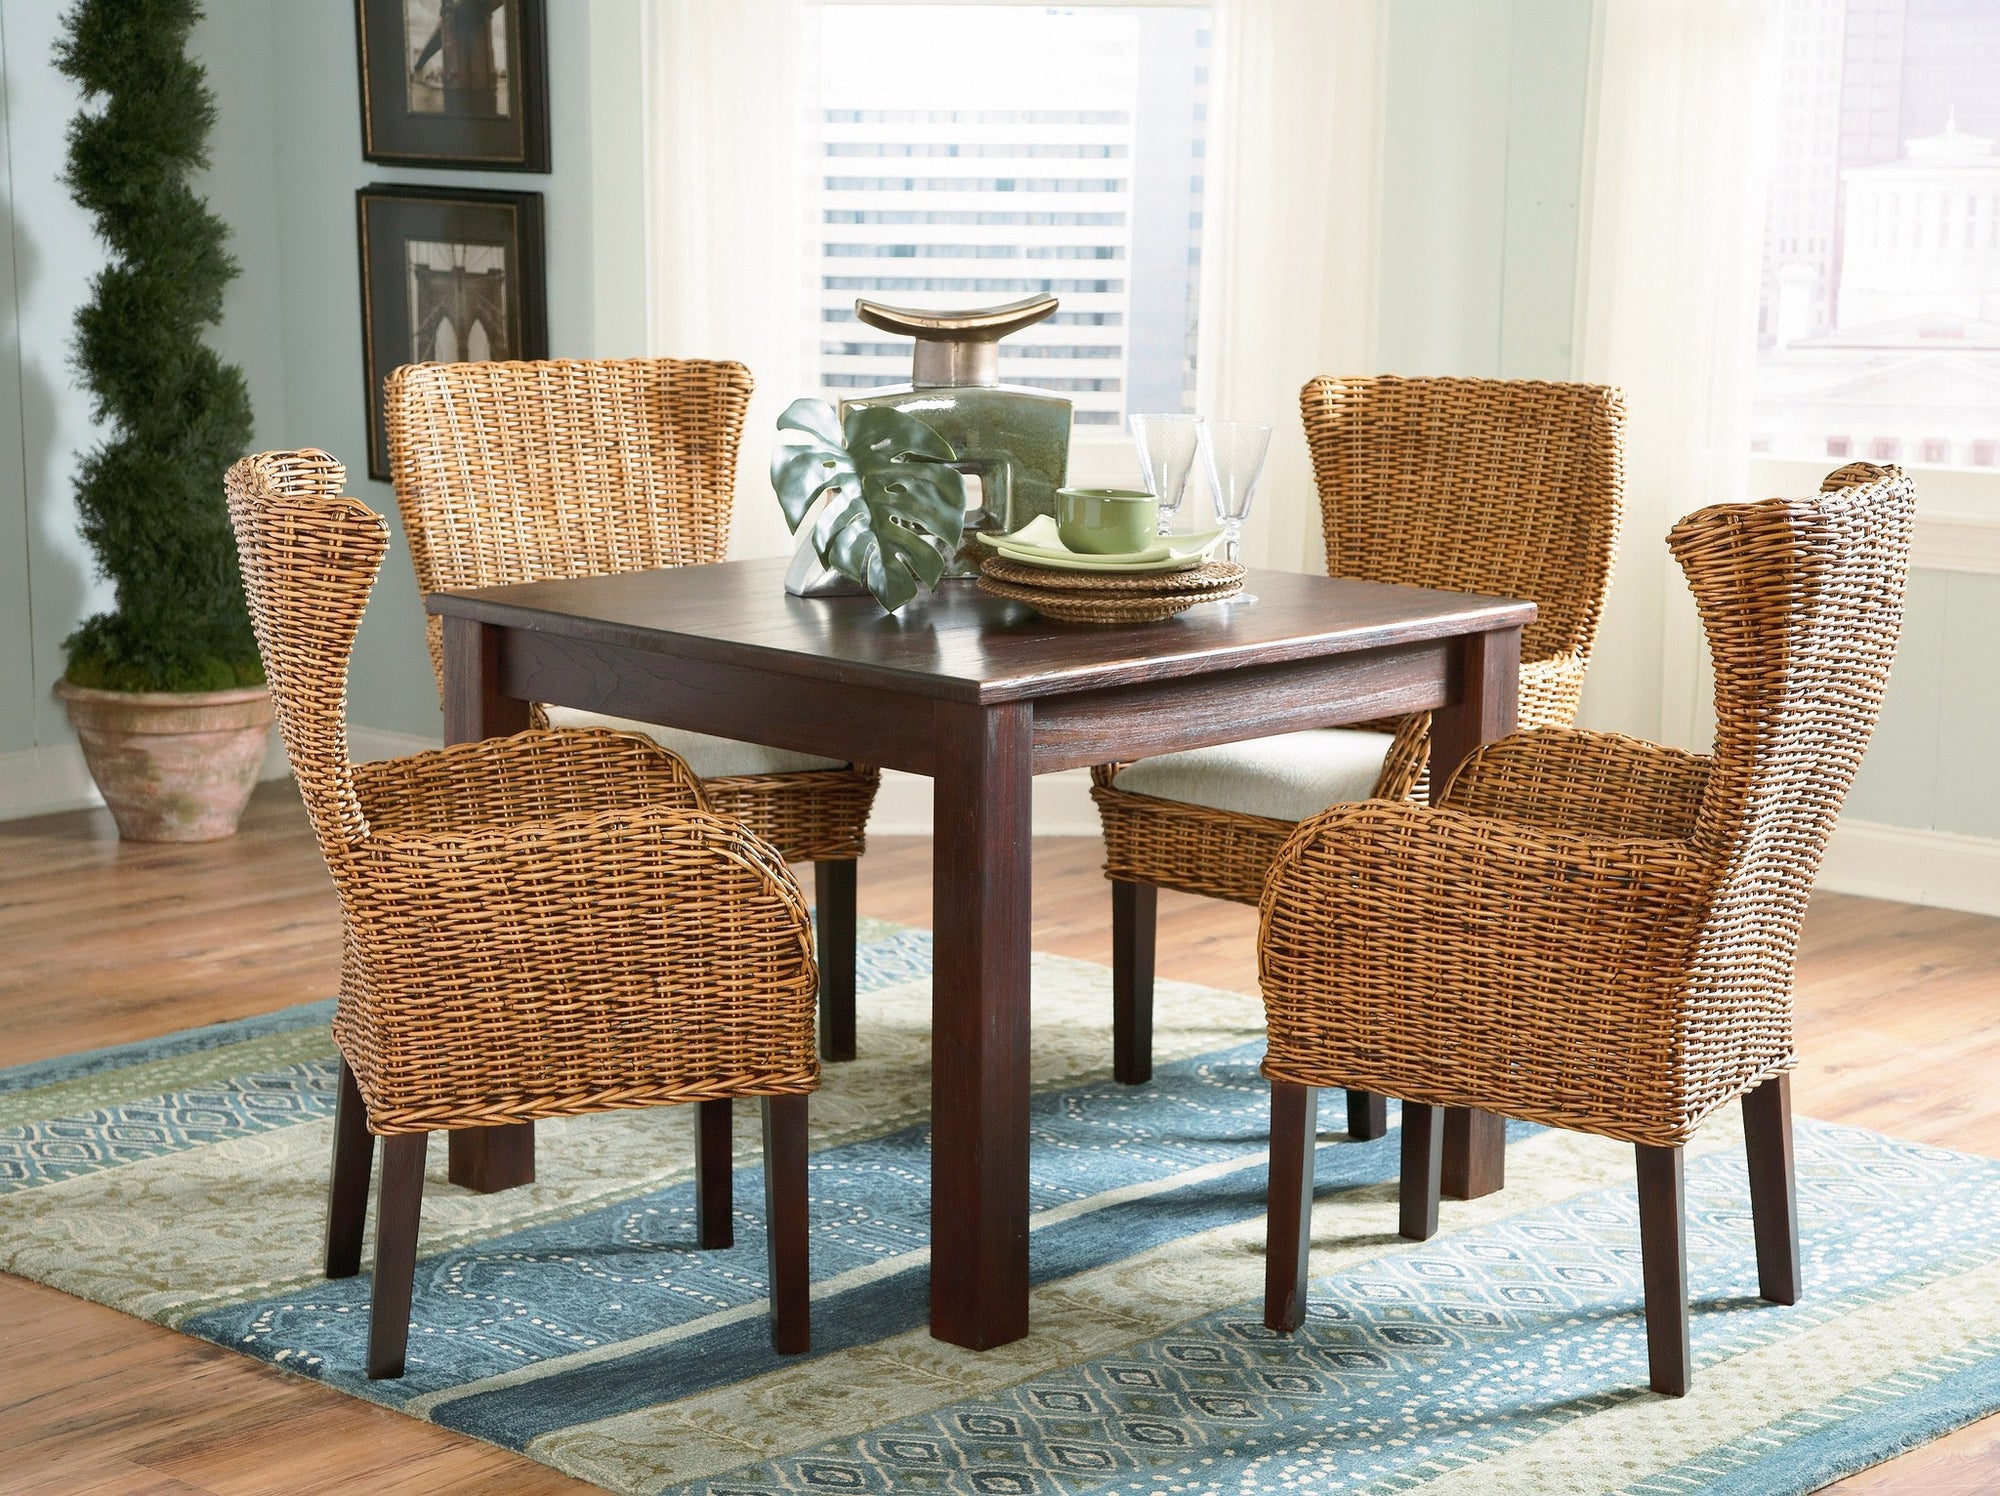 Designer Wicker & Rattan By Tribor Clarissa Porch Dining Arm Chair Chair - Rattan Imports